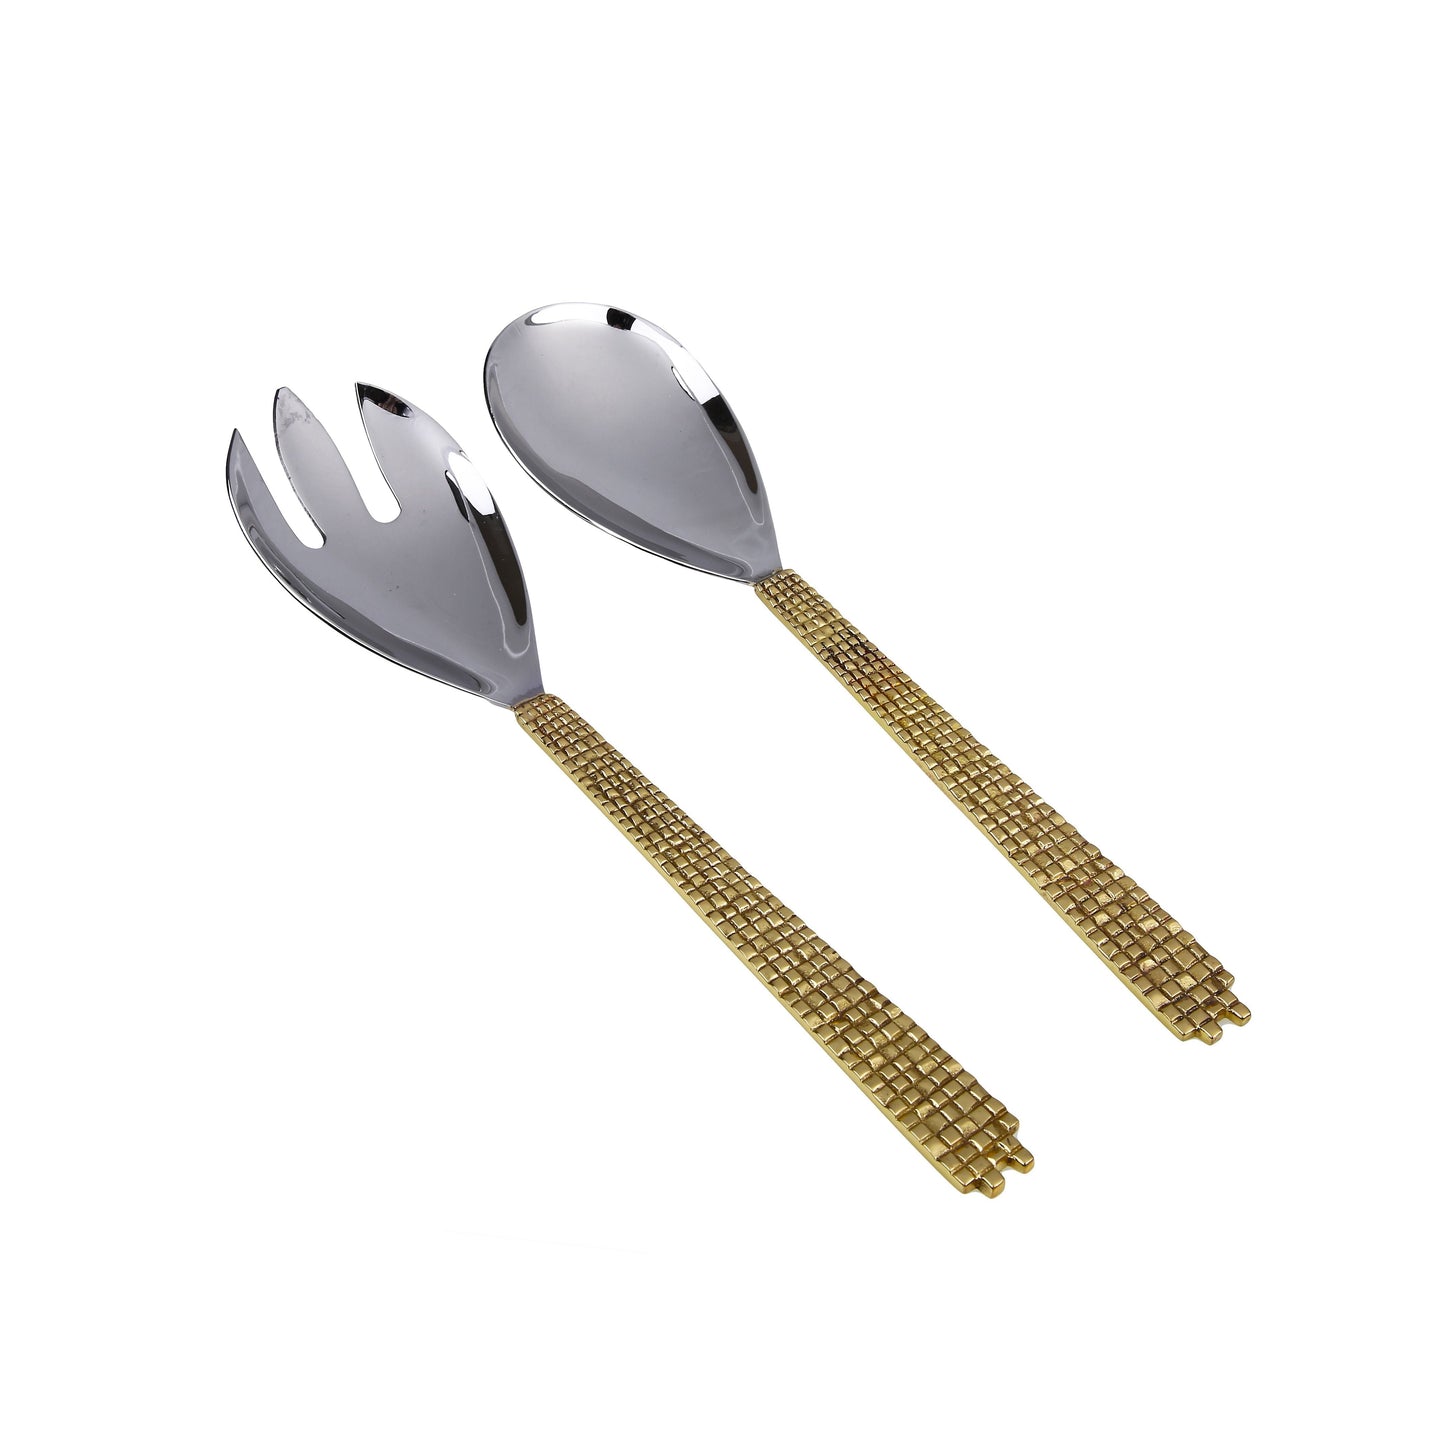 Classic Touch Set Of 2 Salad Servers With Mosaic Design, Gold, 12"